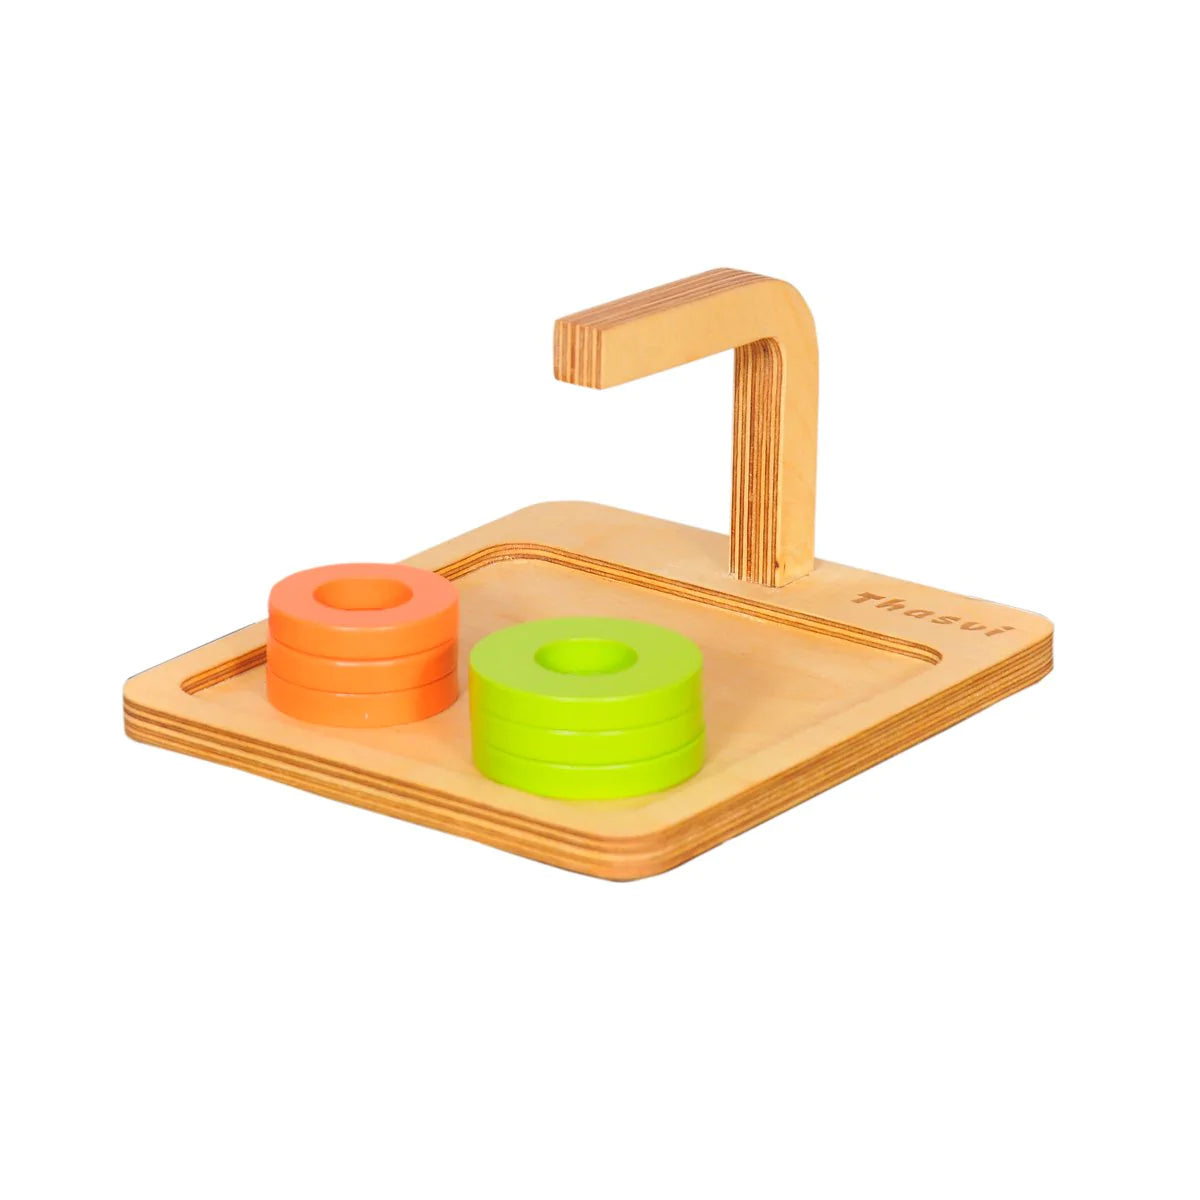 Buy Curved Dowel Wooden Stacker - SkilloToys.com